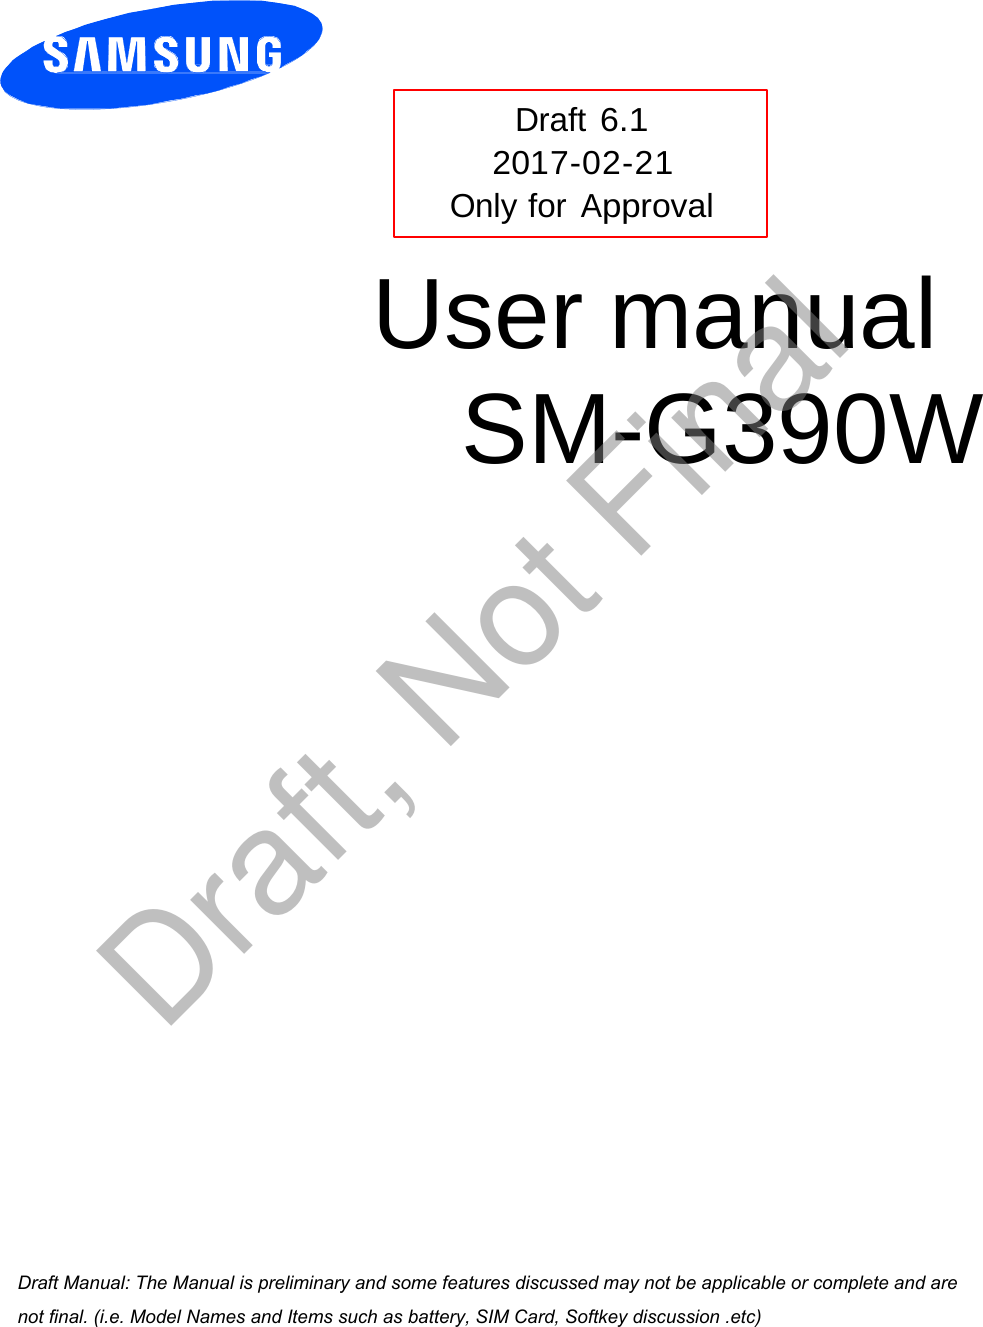 Draft 6.1 2017-02-21 Only for Approval User manual SM-G390W a ana  ana  na and  a dd a n  aa   and a n na  d a and   a a  ad  dn Draft, Not Final